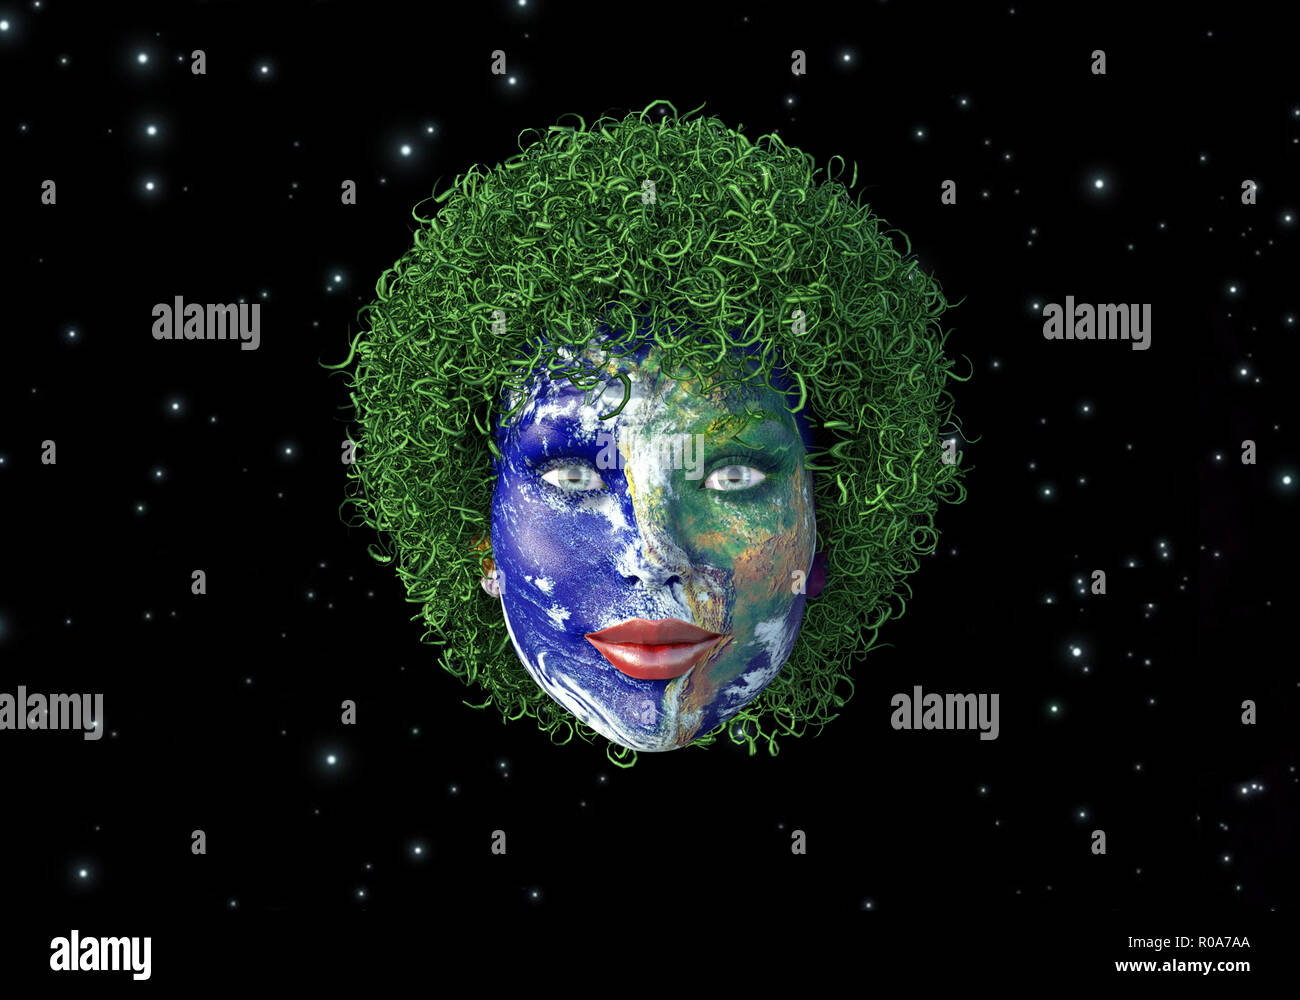 Mother Earth, woman's face representing Mother Nature in space Stock Photo